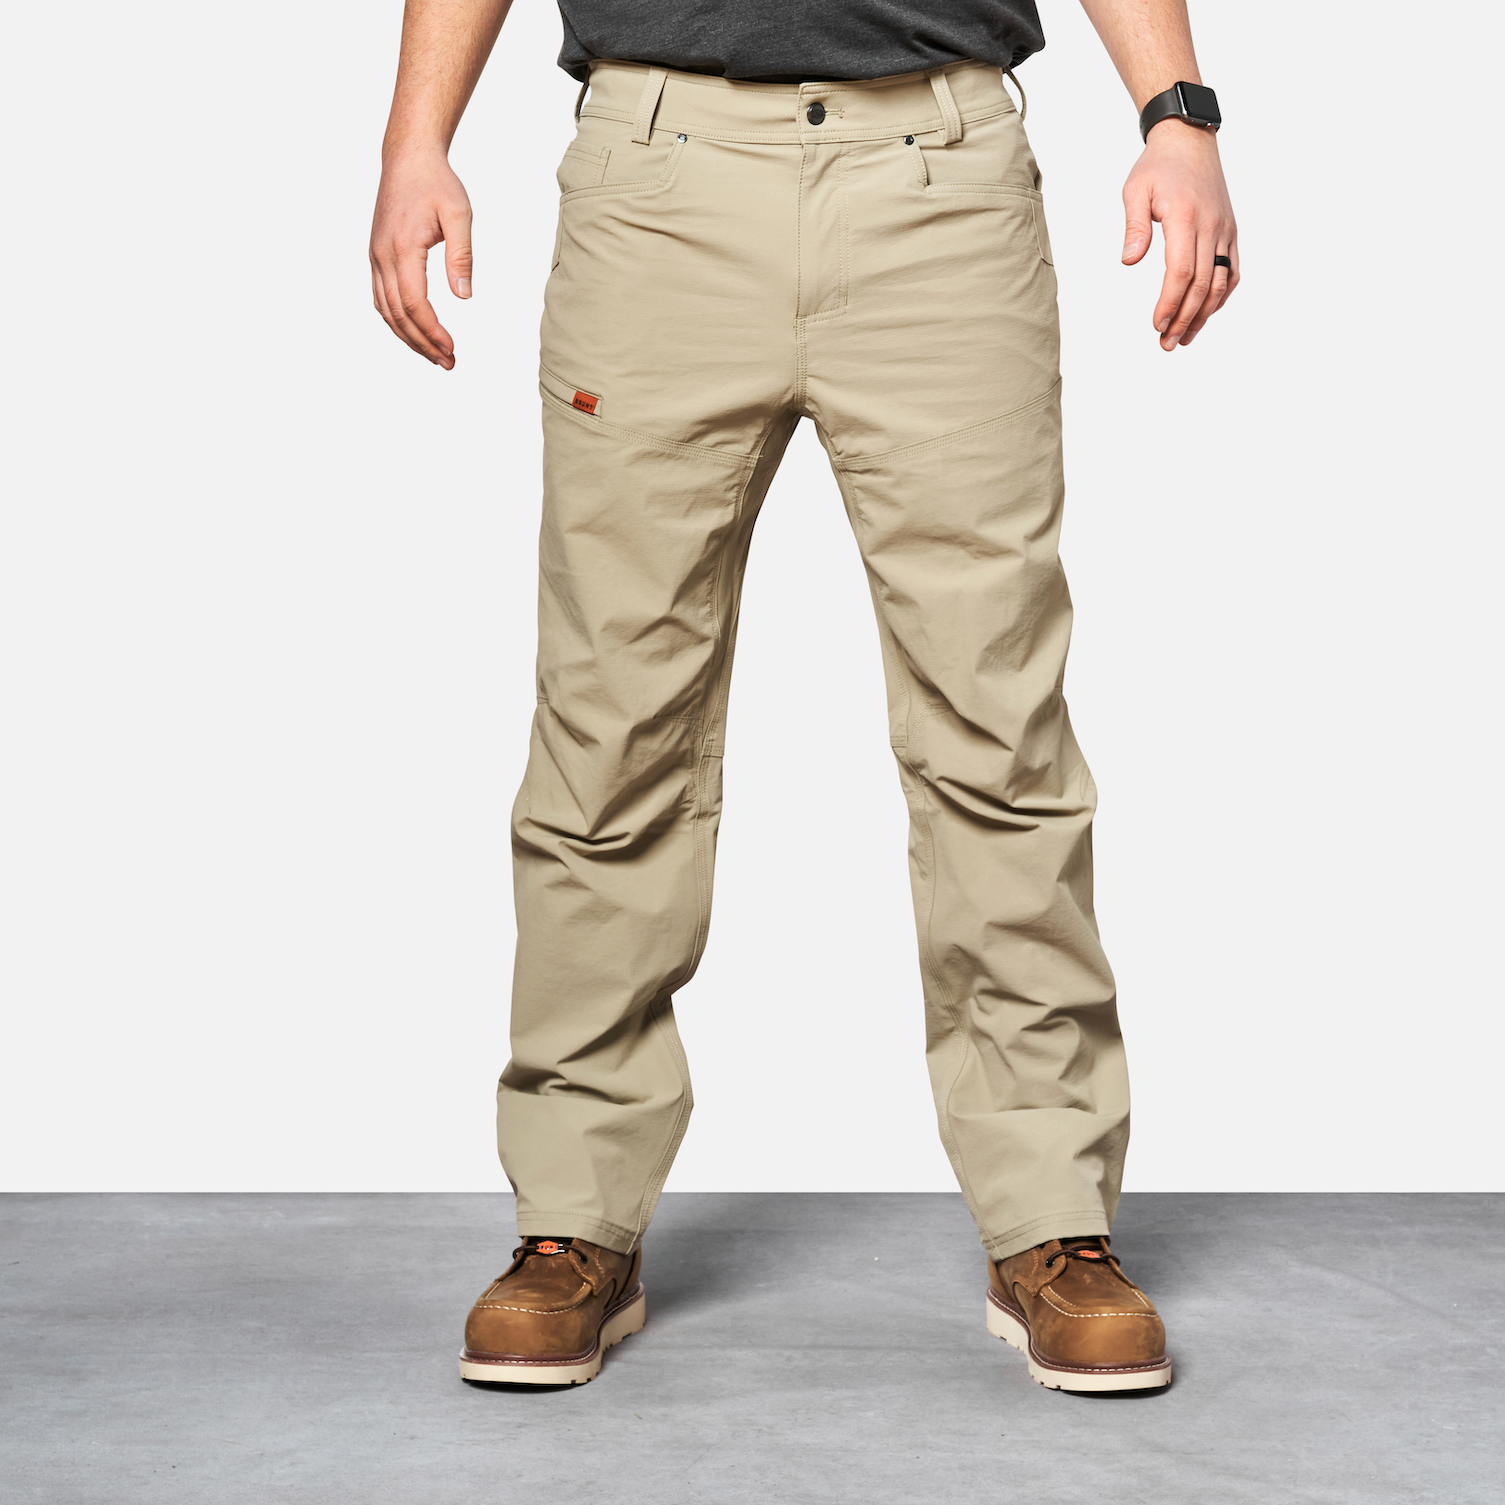 The Costello Pant